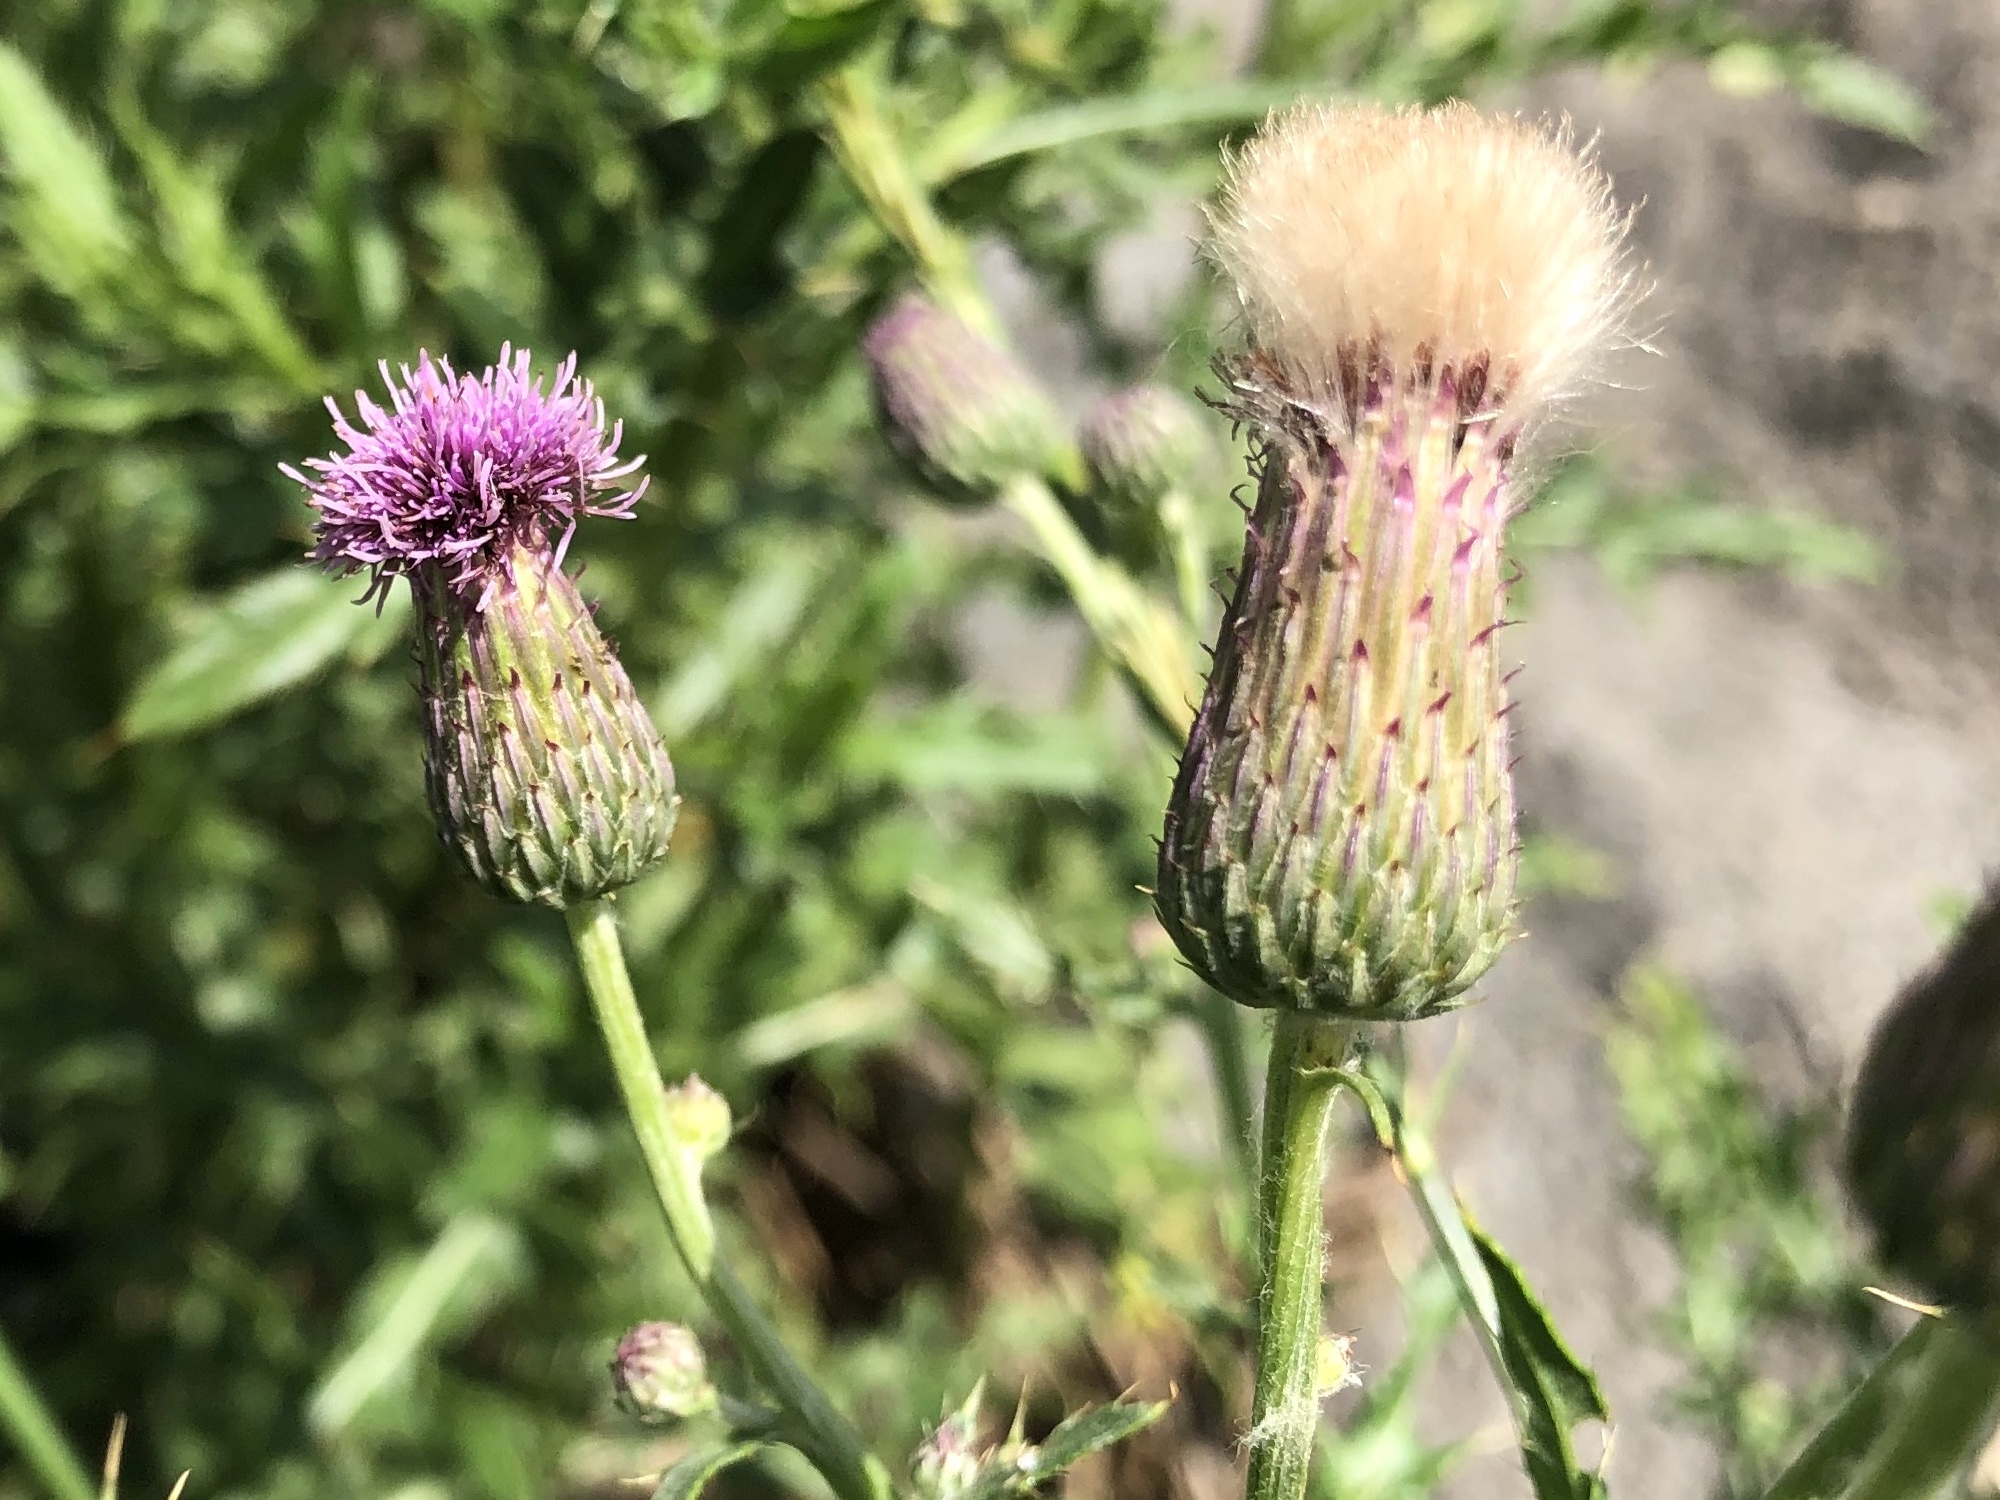 Canada Thistle on the shore of Lake Wingra in Wingra Park in Madison, Wisconsin on July 11, 2019.